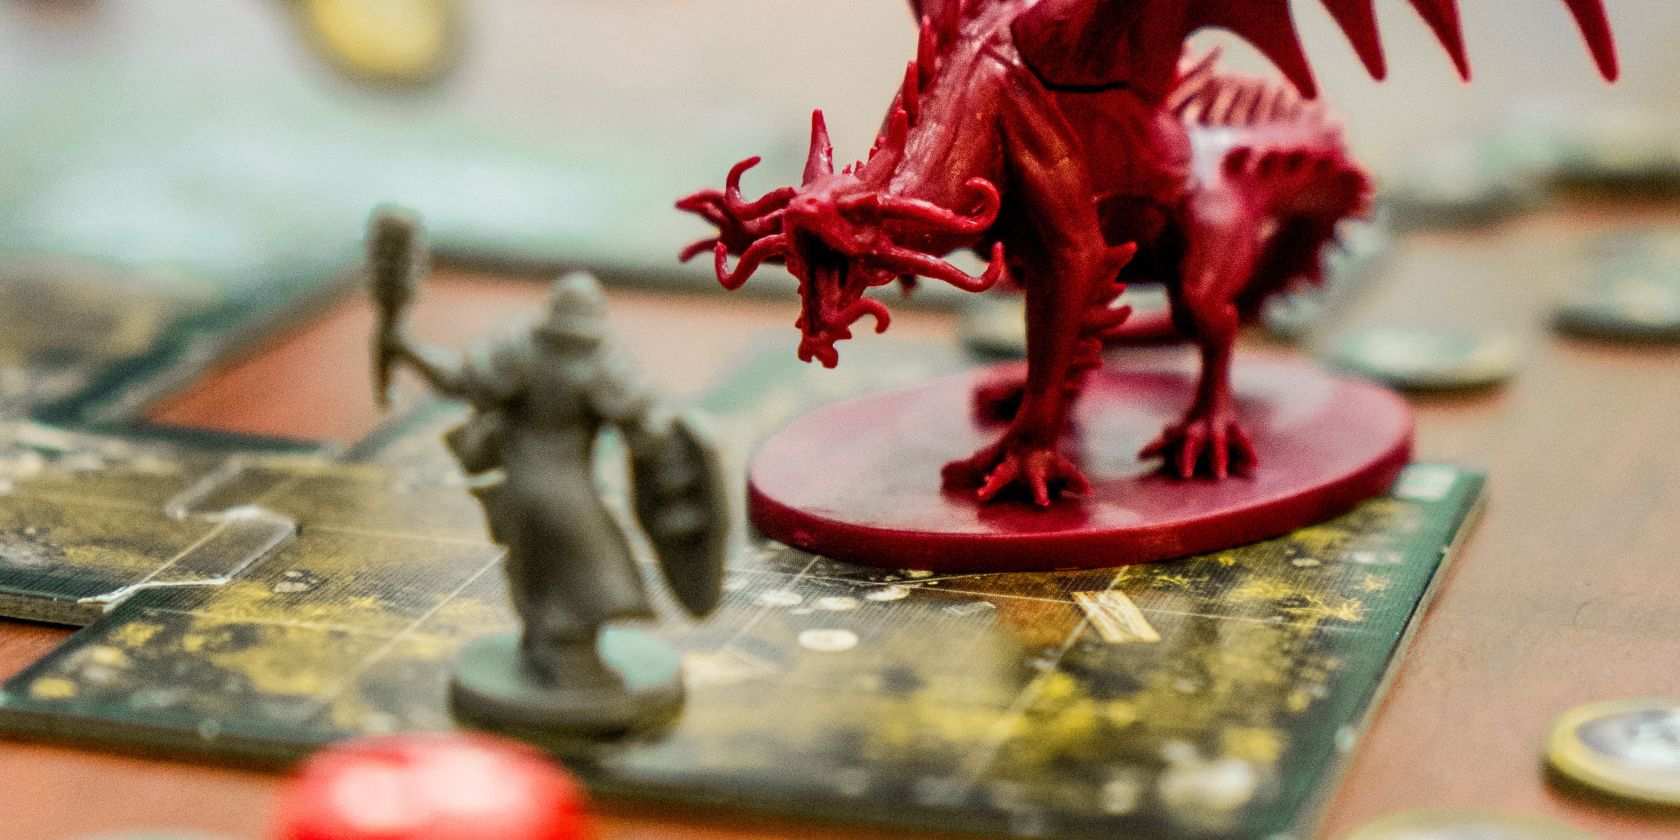 RPG character tokens engaged in combat on a cutout tabletop battle map